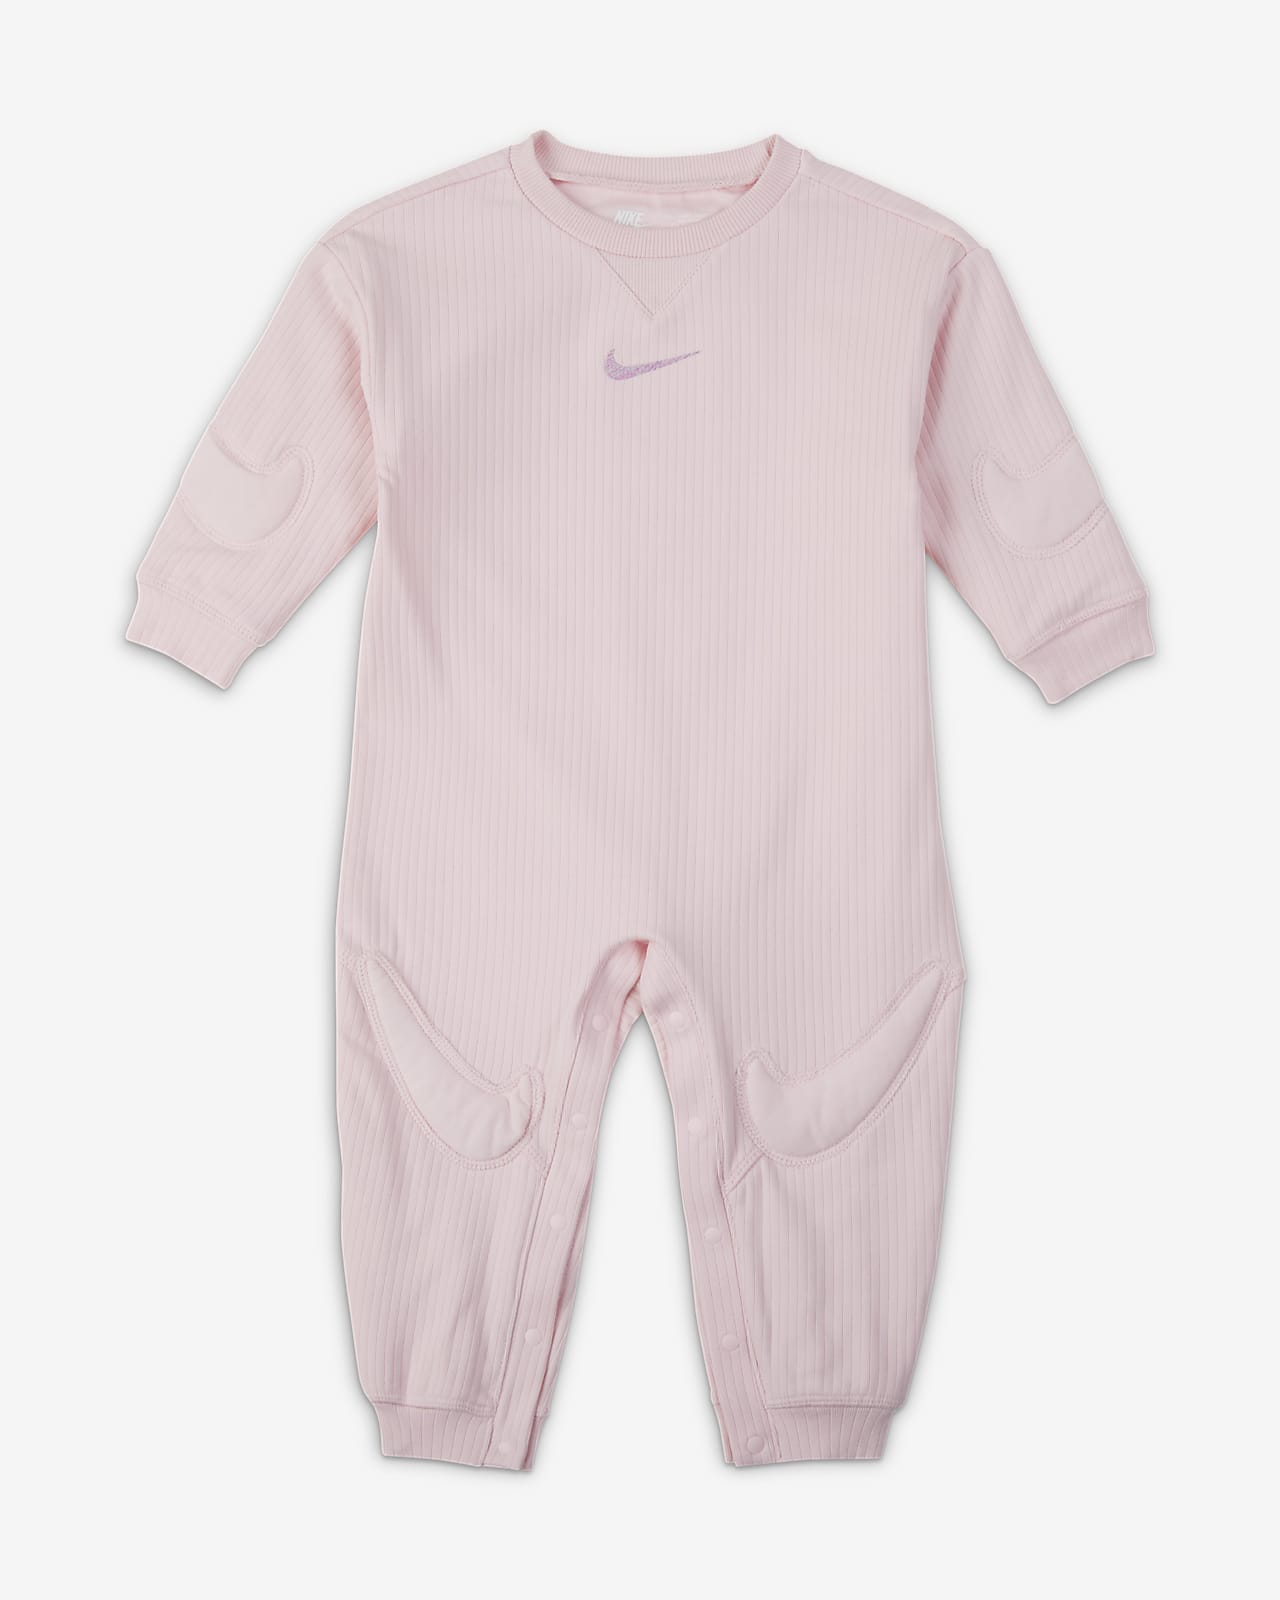 Nike "Ready, Set" Baby Coveralls